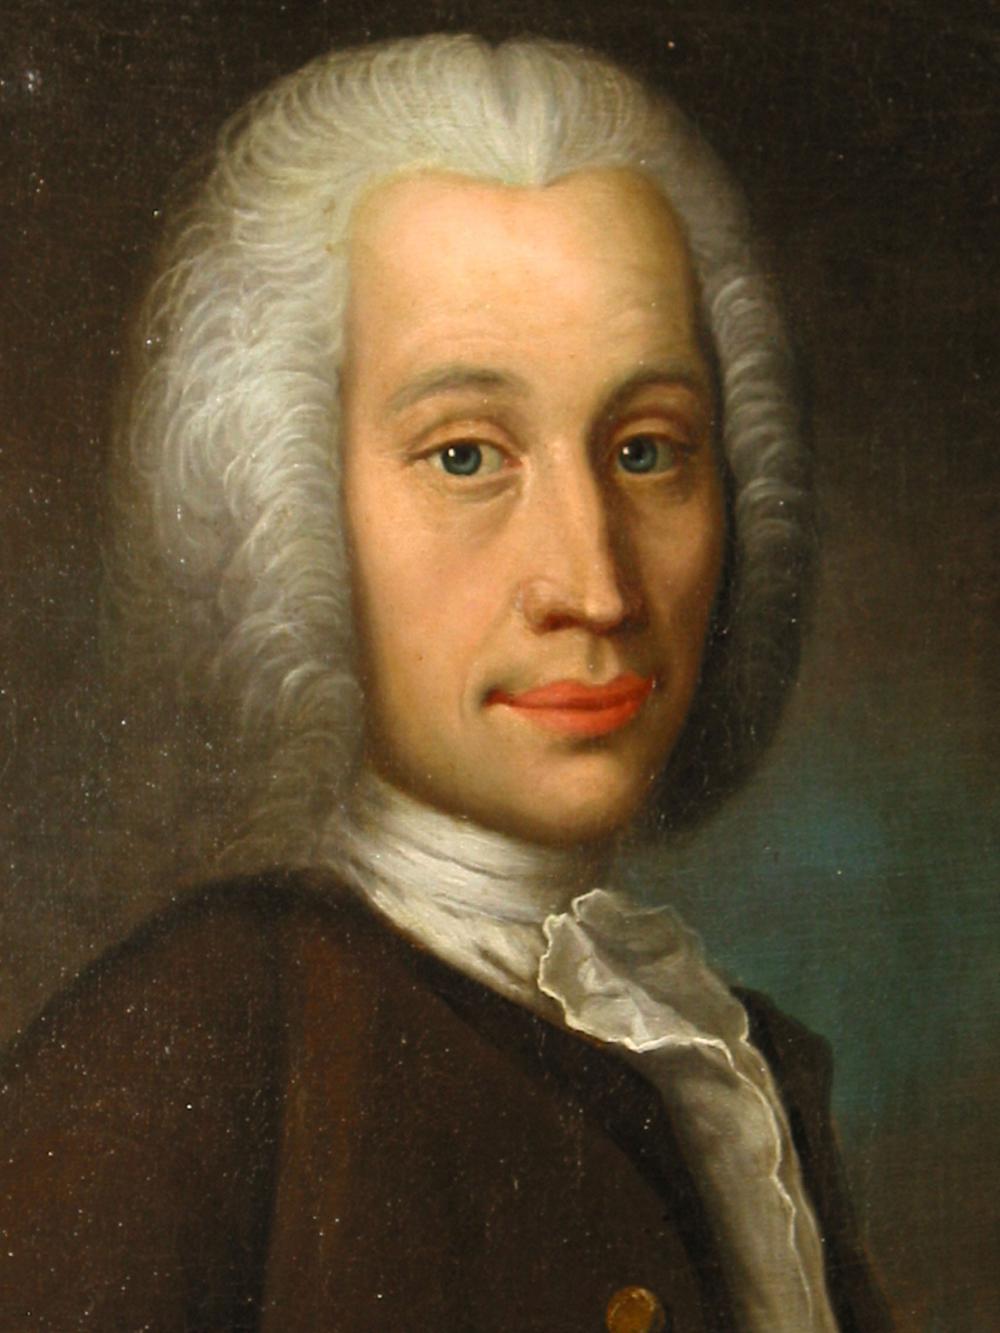 Anders Celsius, painting by Olof Arenius (1701--17